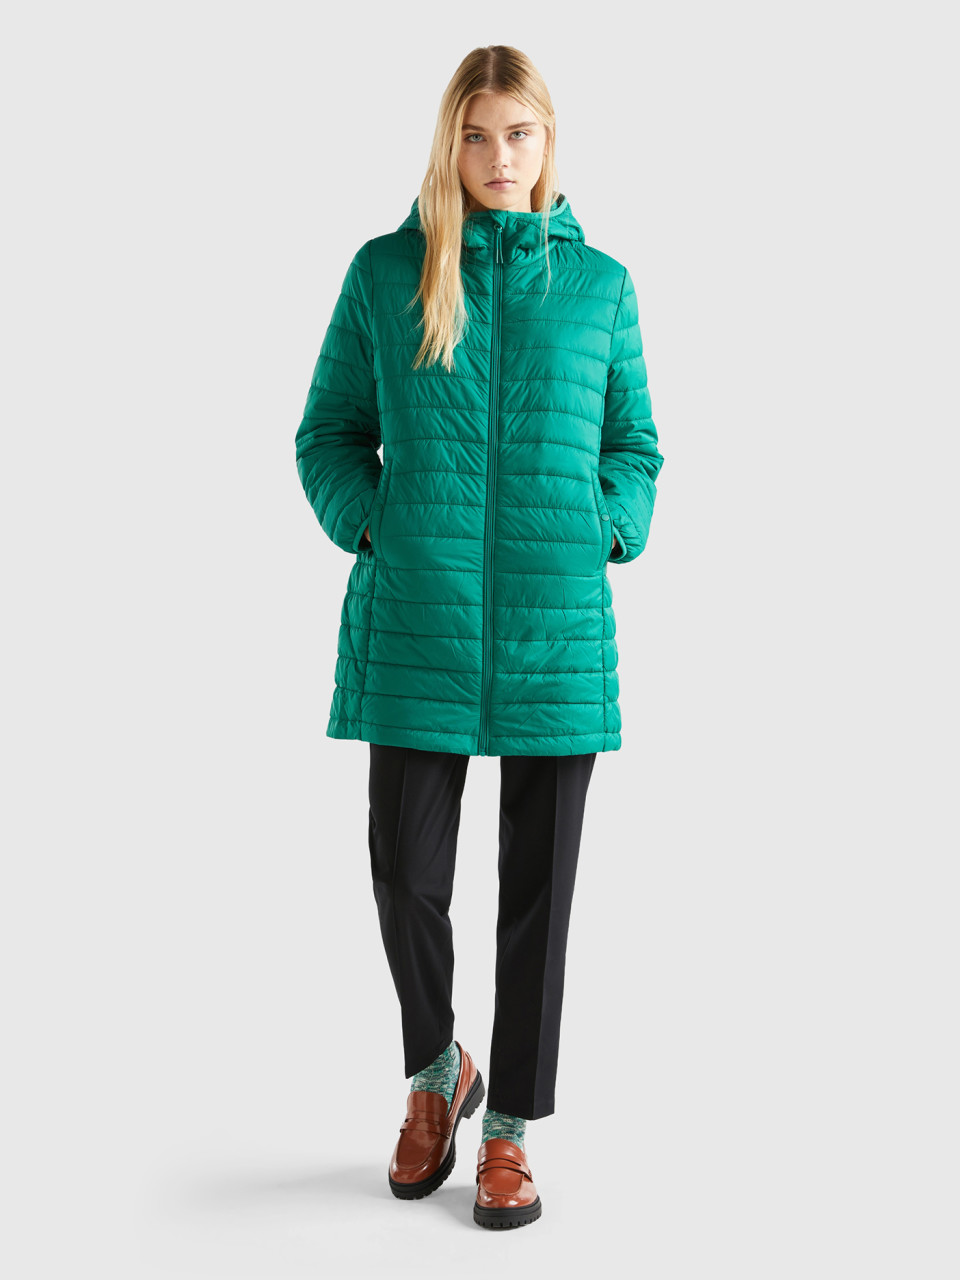 Benetton, Padded Jacket With Recycled Wadding, Green, Women